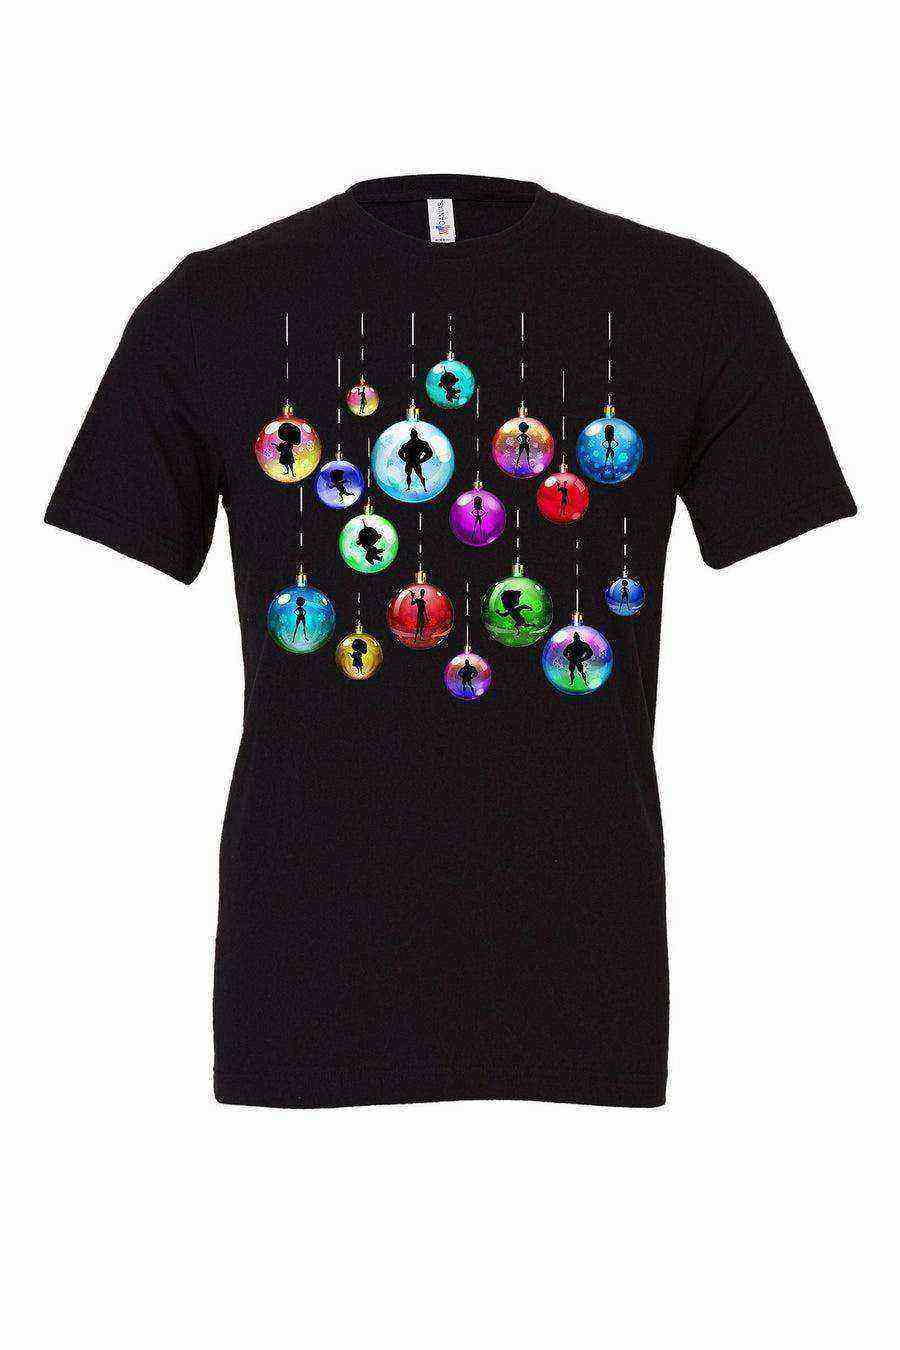 Womens | Incredibles Ornaments Shirt | Christmas In - Dylan's Tees